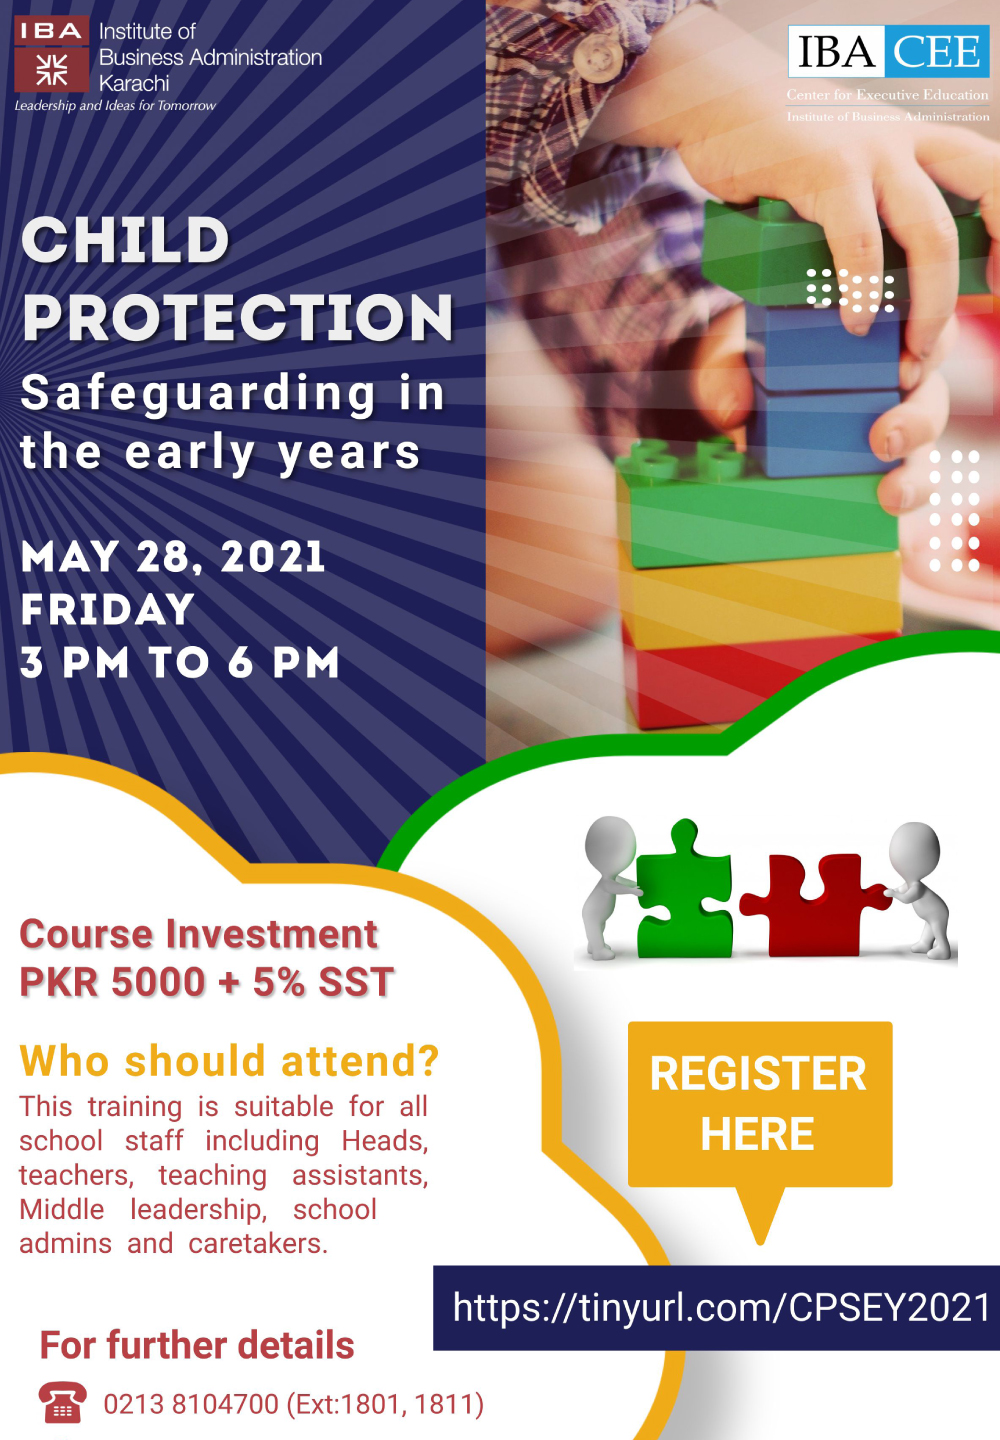 Child Protection (Safeguarding in the Early Years)